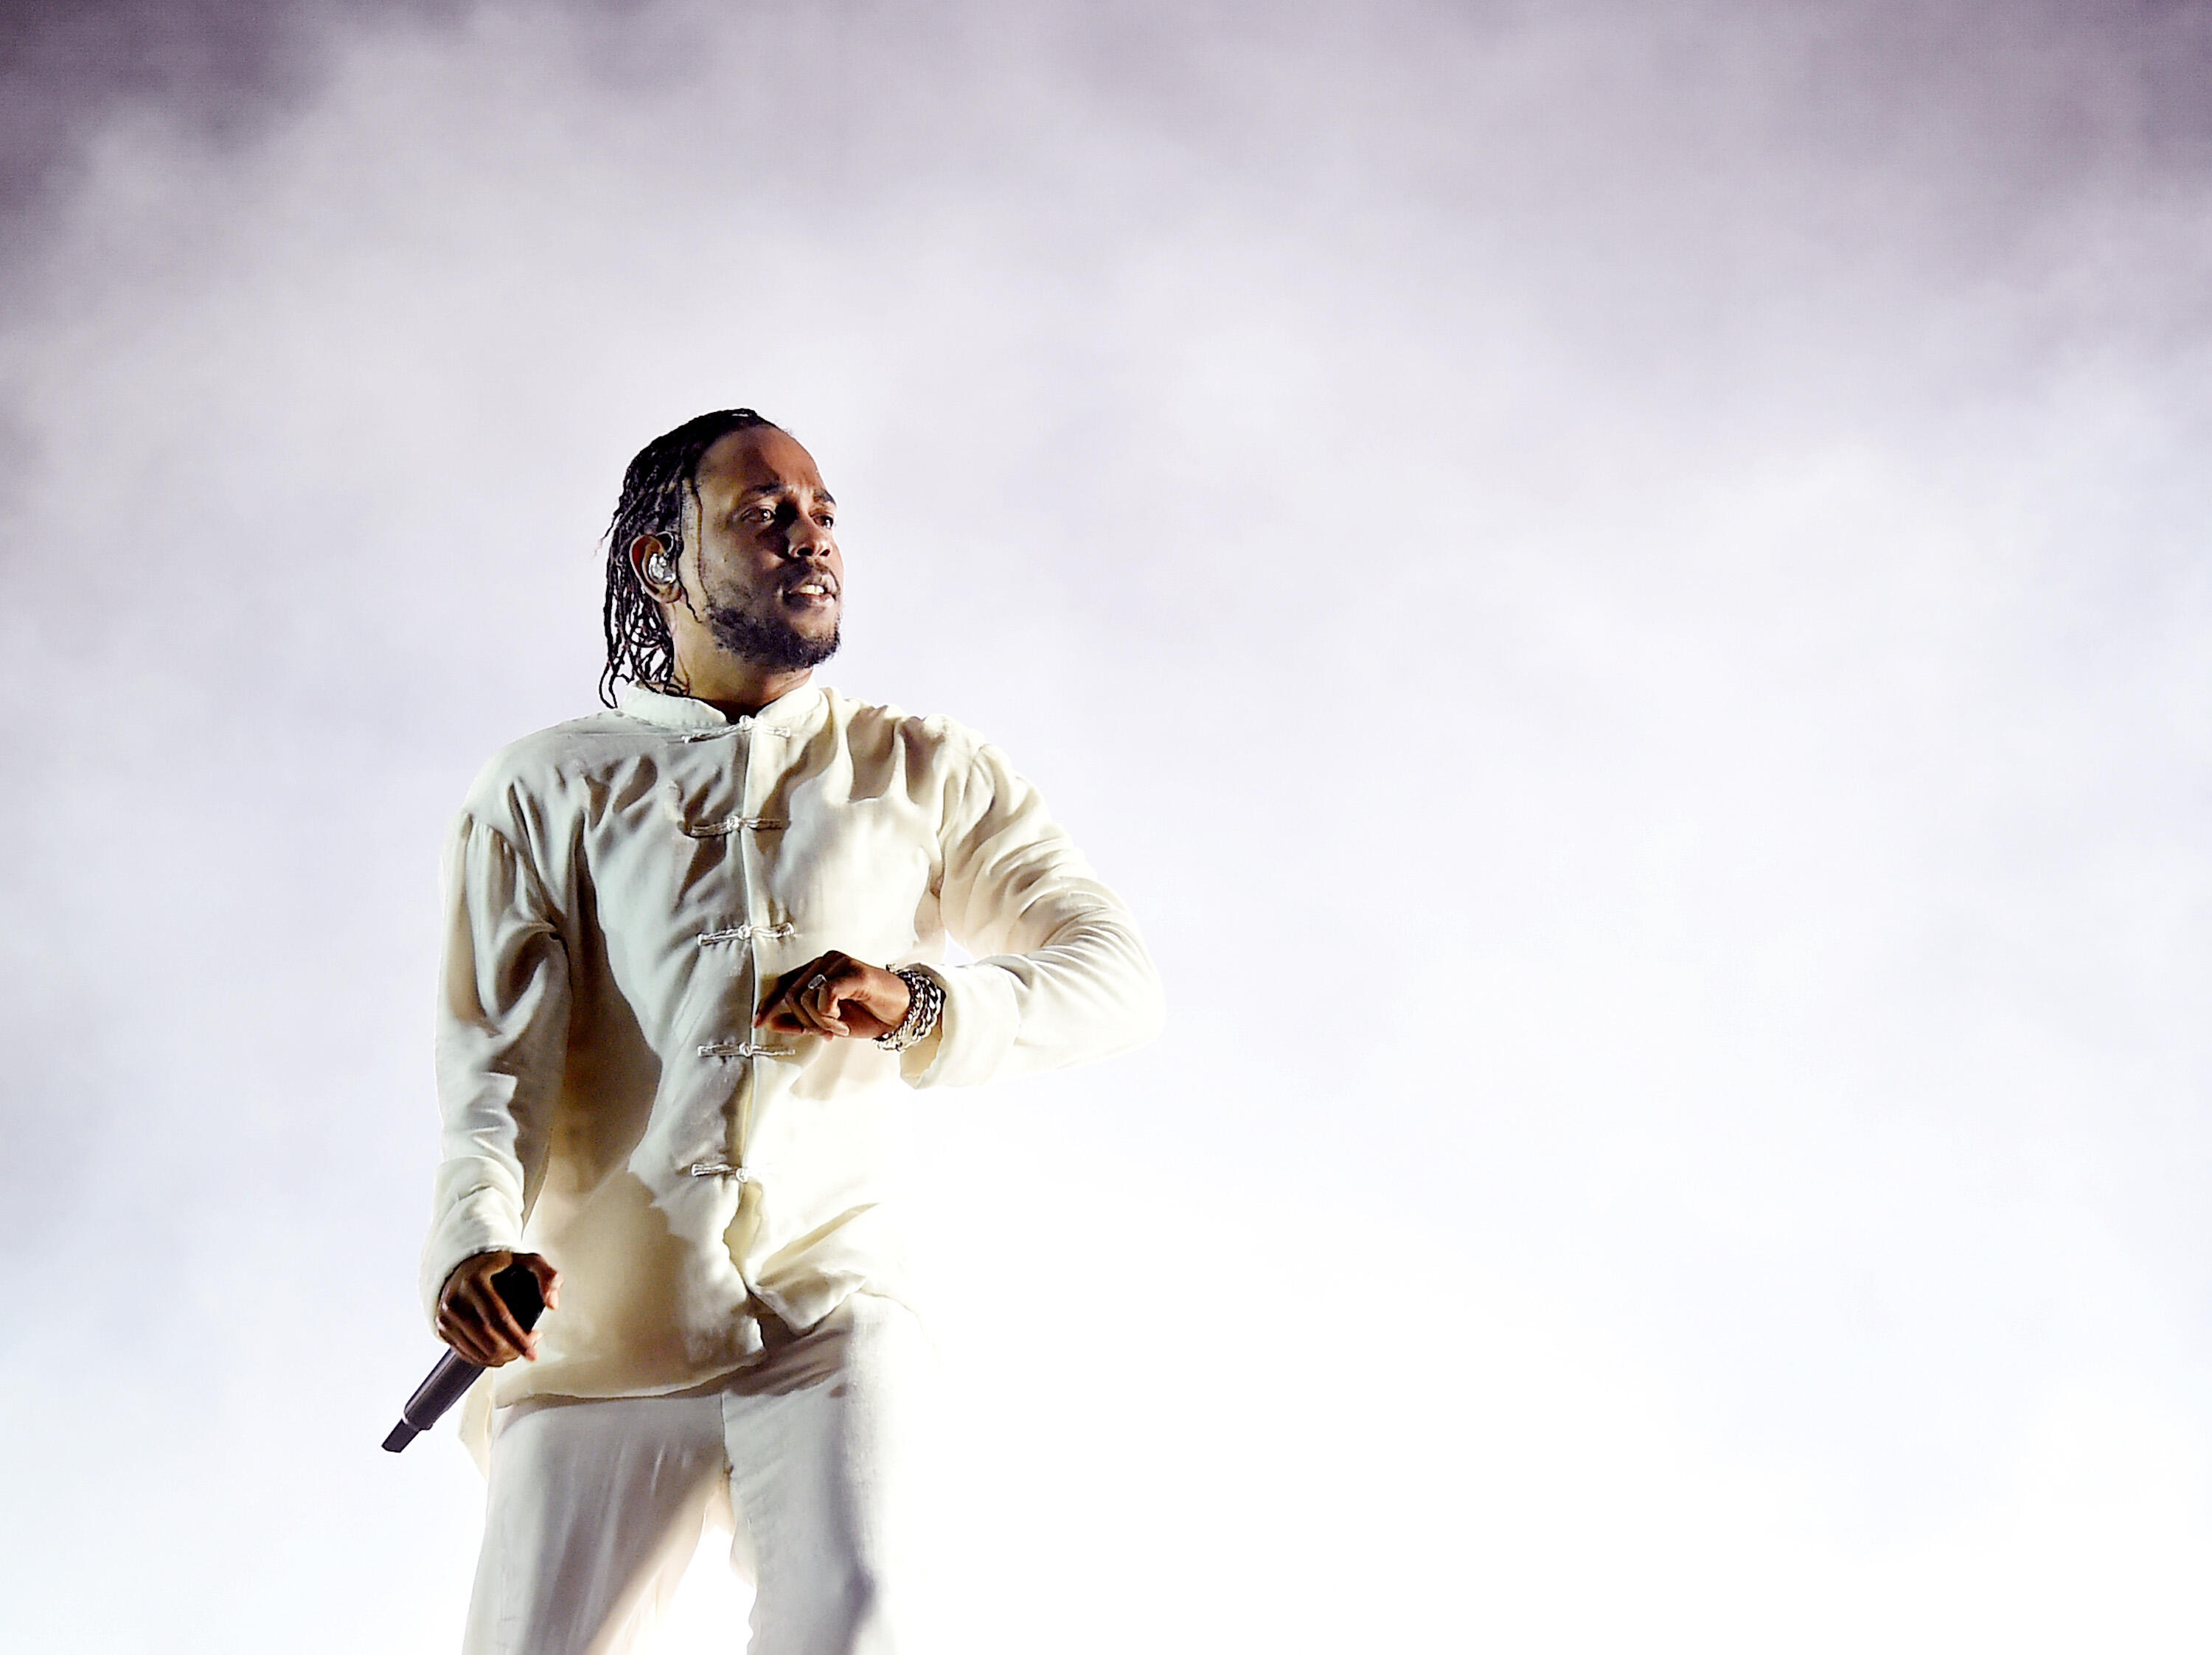 INDIO, CA - APRIL 23:  Kendrick Lamar performs on the Coachella Stage during day 3 (Weekend 2) of the Coachella Valley Music And Arts Festival on April 23, 2017 in Indio, California.  (Photo by Kevin Winter/Getty Images for Coachella)